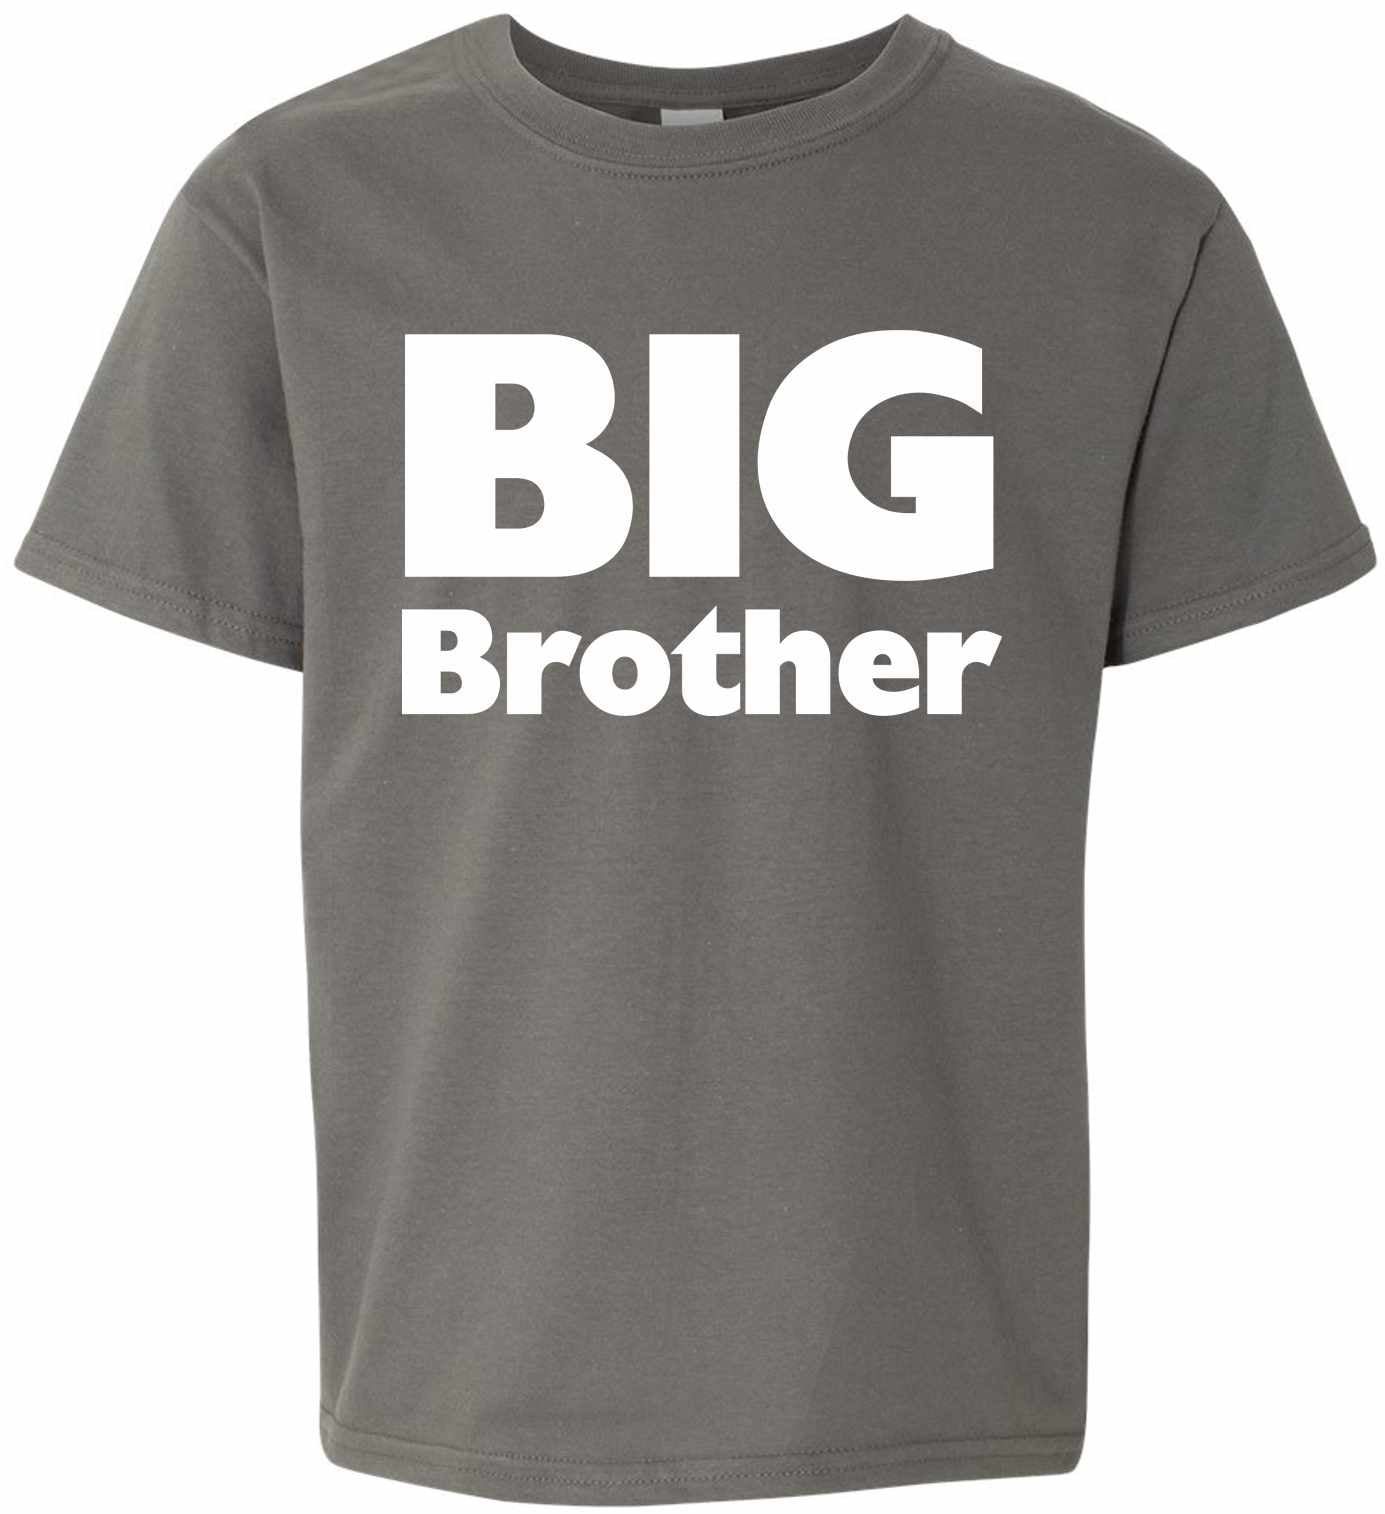 BIG BROTHER on Youth T-Shirt (#861-201)